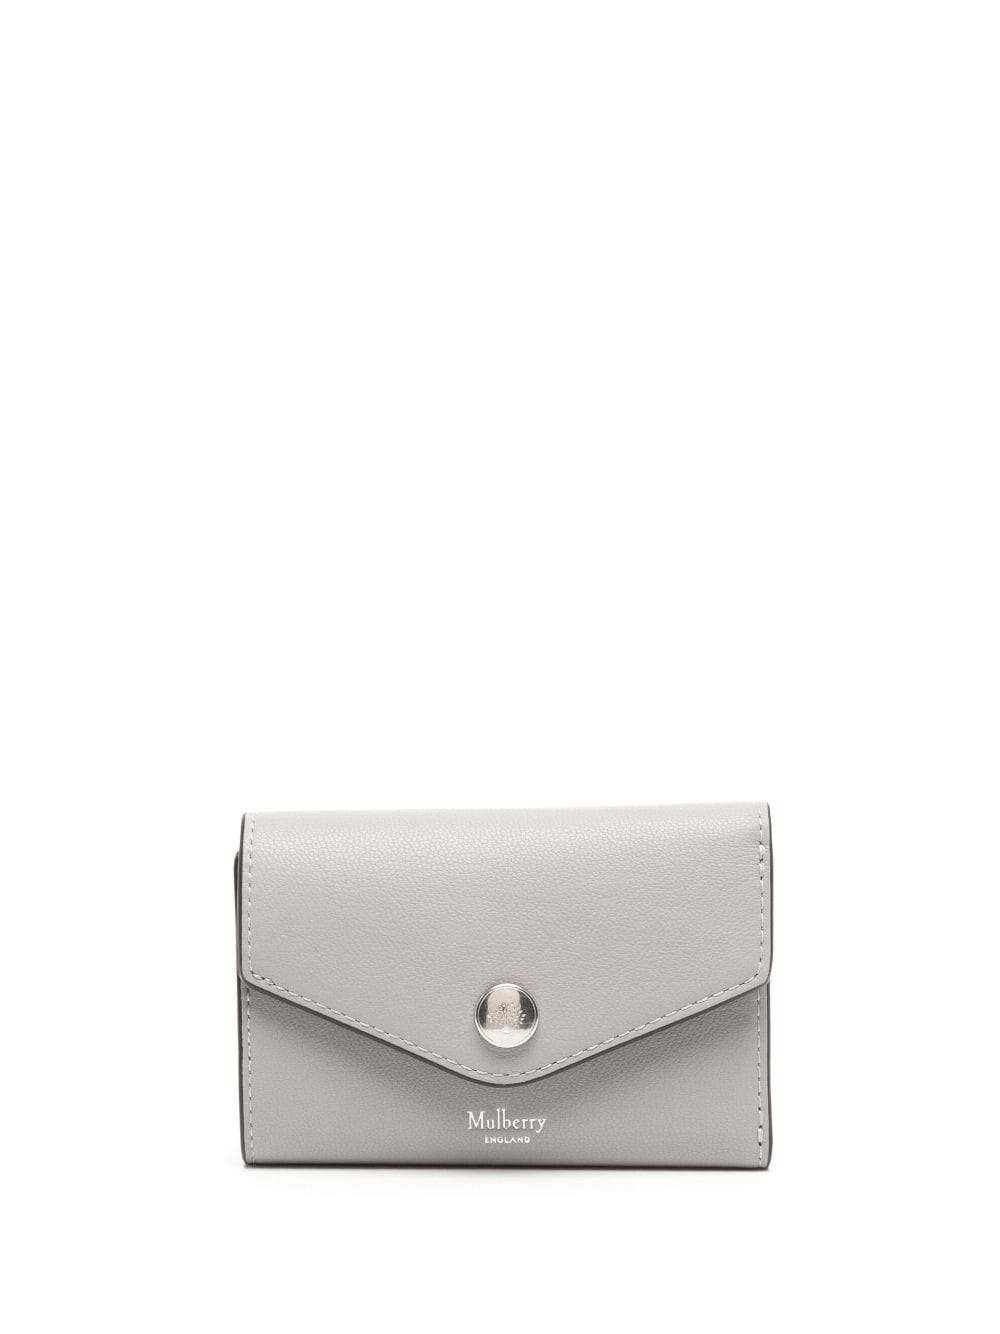 Mulberry grained leather wallet - Grey von Mulberry